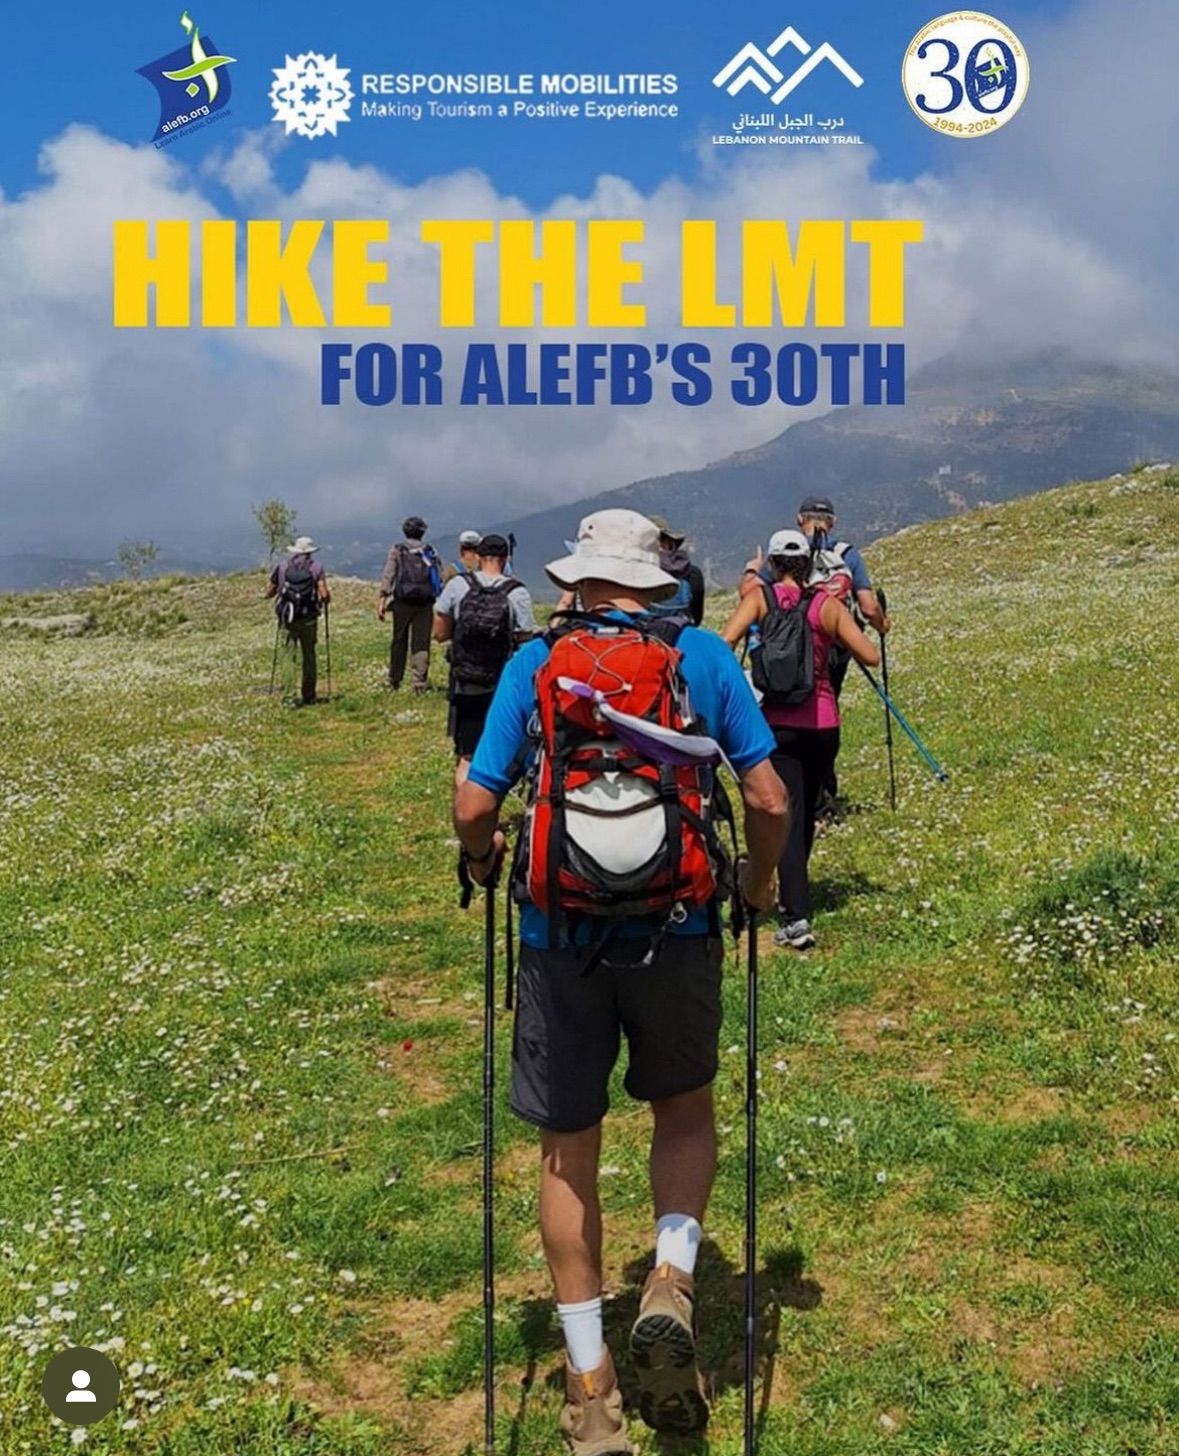 Hike the LMT for Alefb\u2019s 30th - July 24